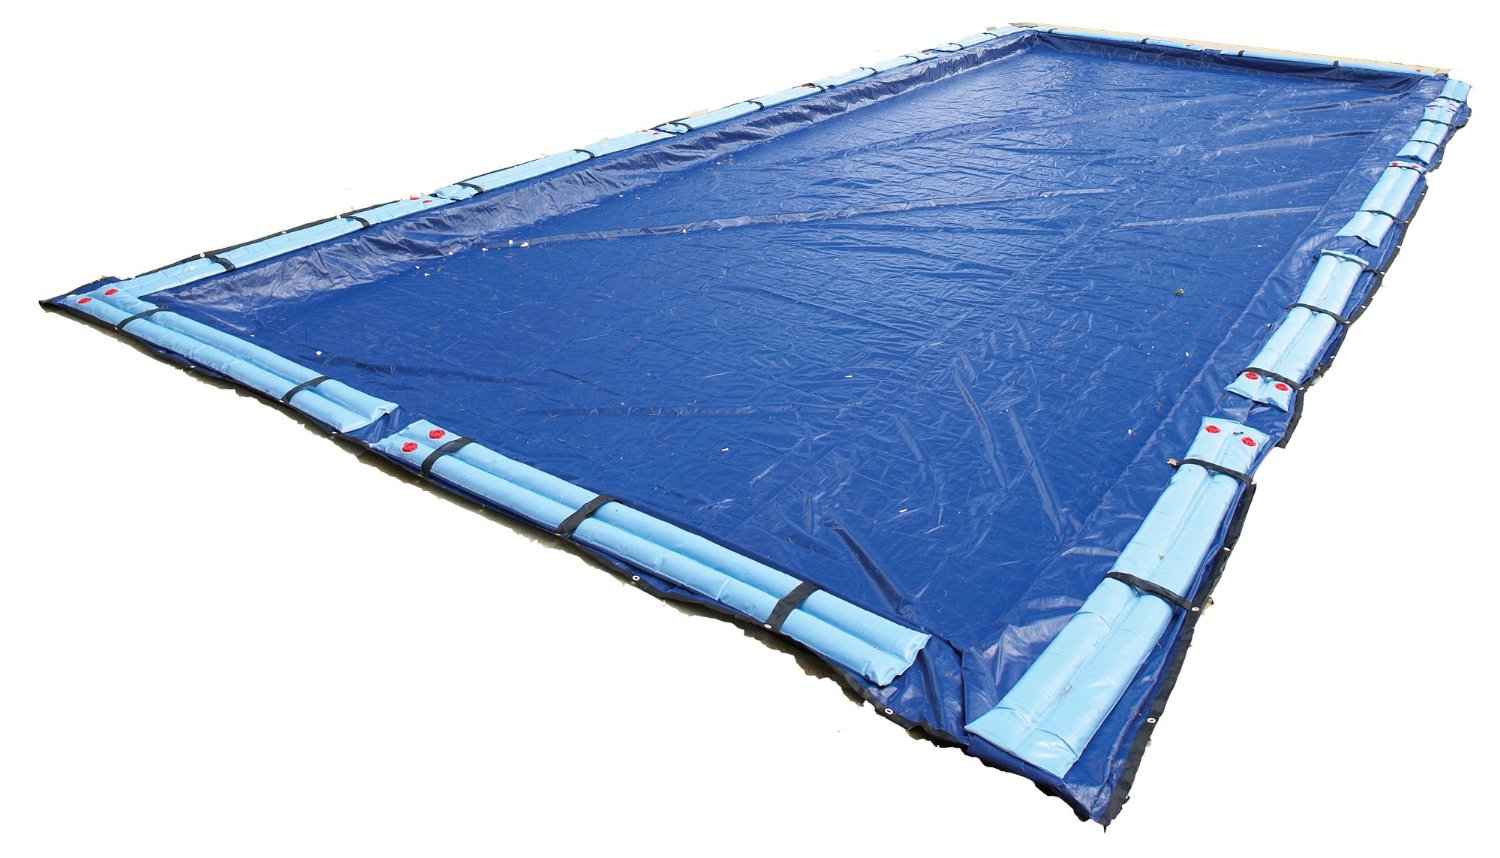 Winter Pool Cover Inground 16X36 Ft Rectangle Arctic Armor 15 Yr Warranty